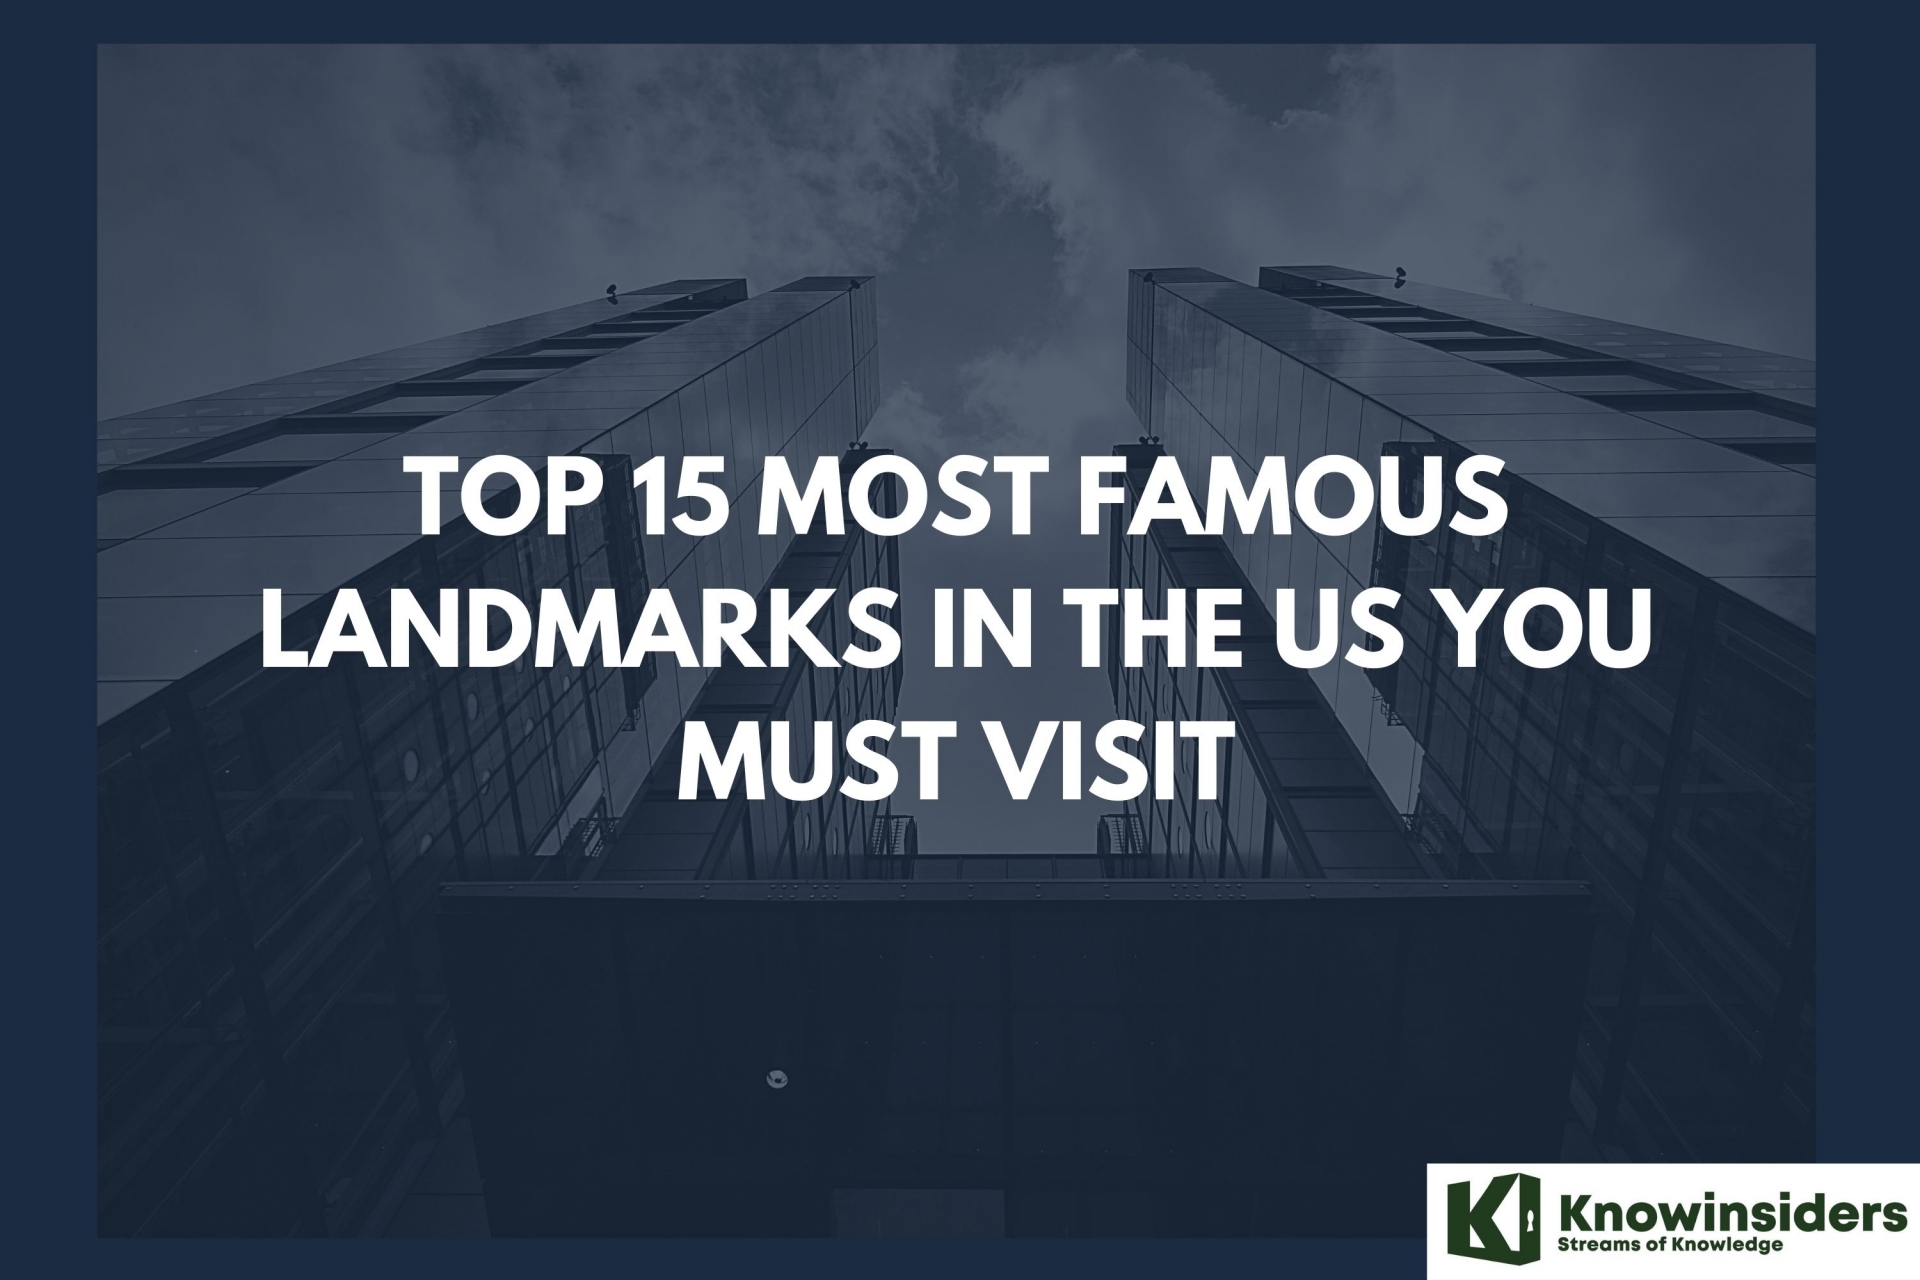 Top 15 Most Famous Landmarks in the US You Must Visit